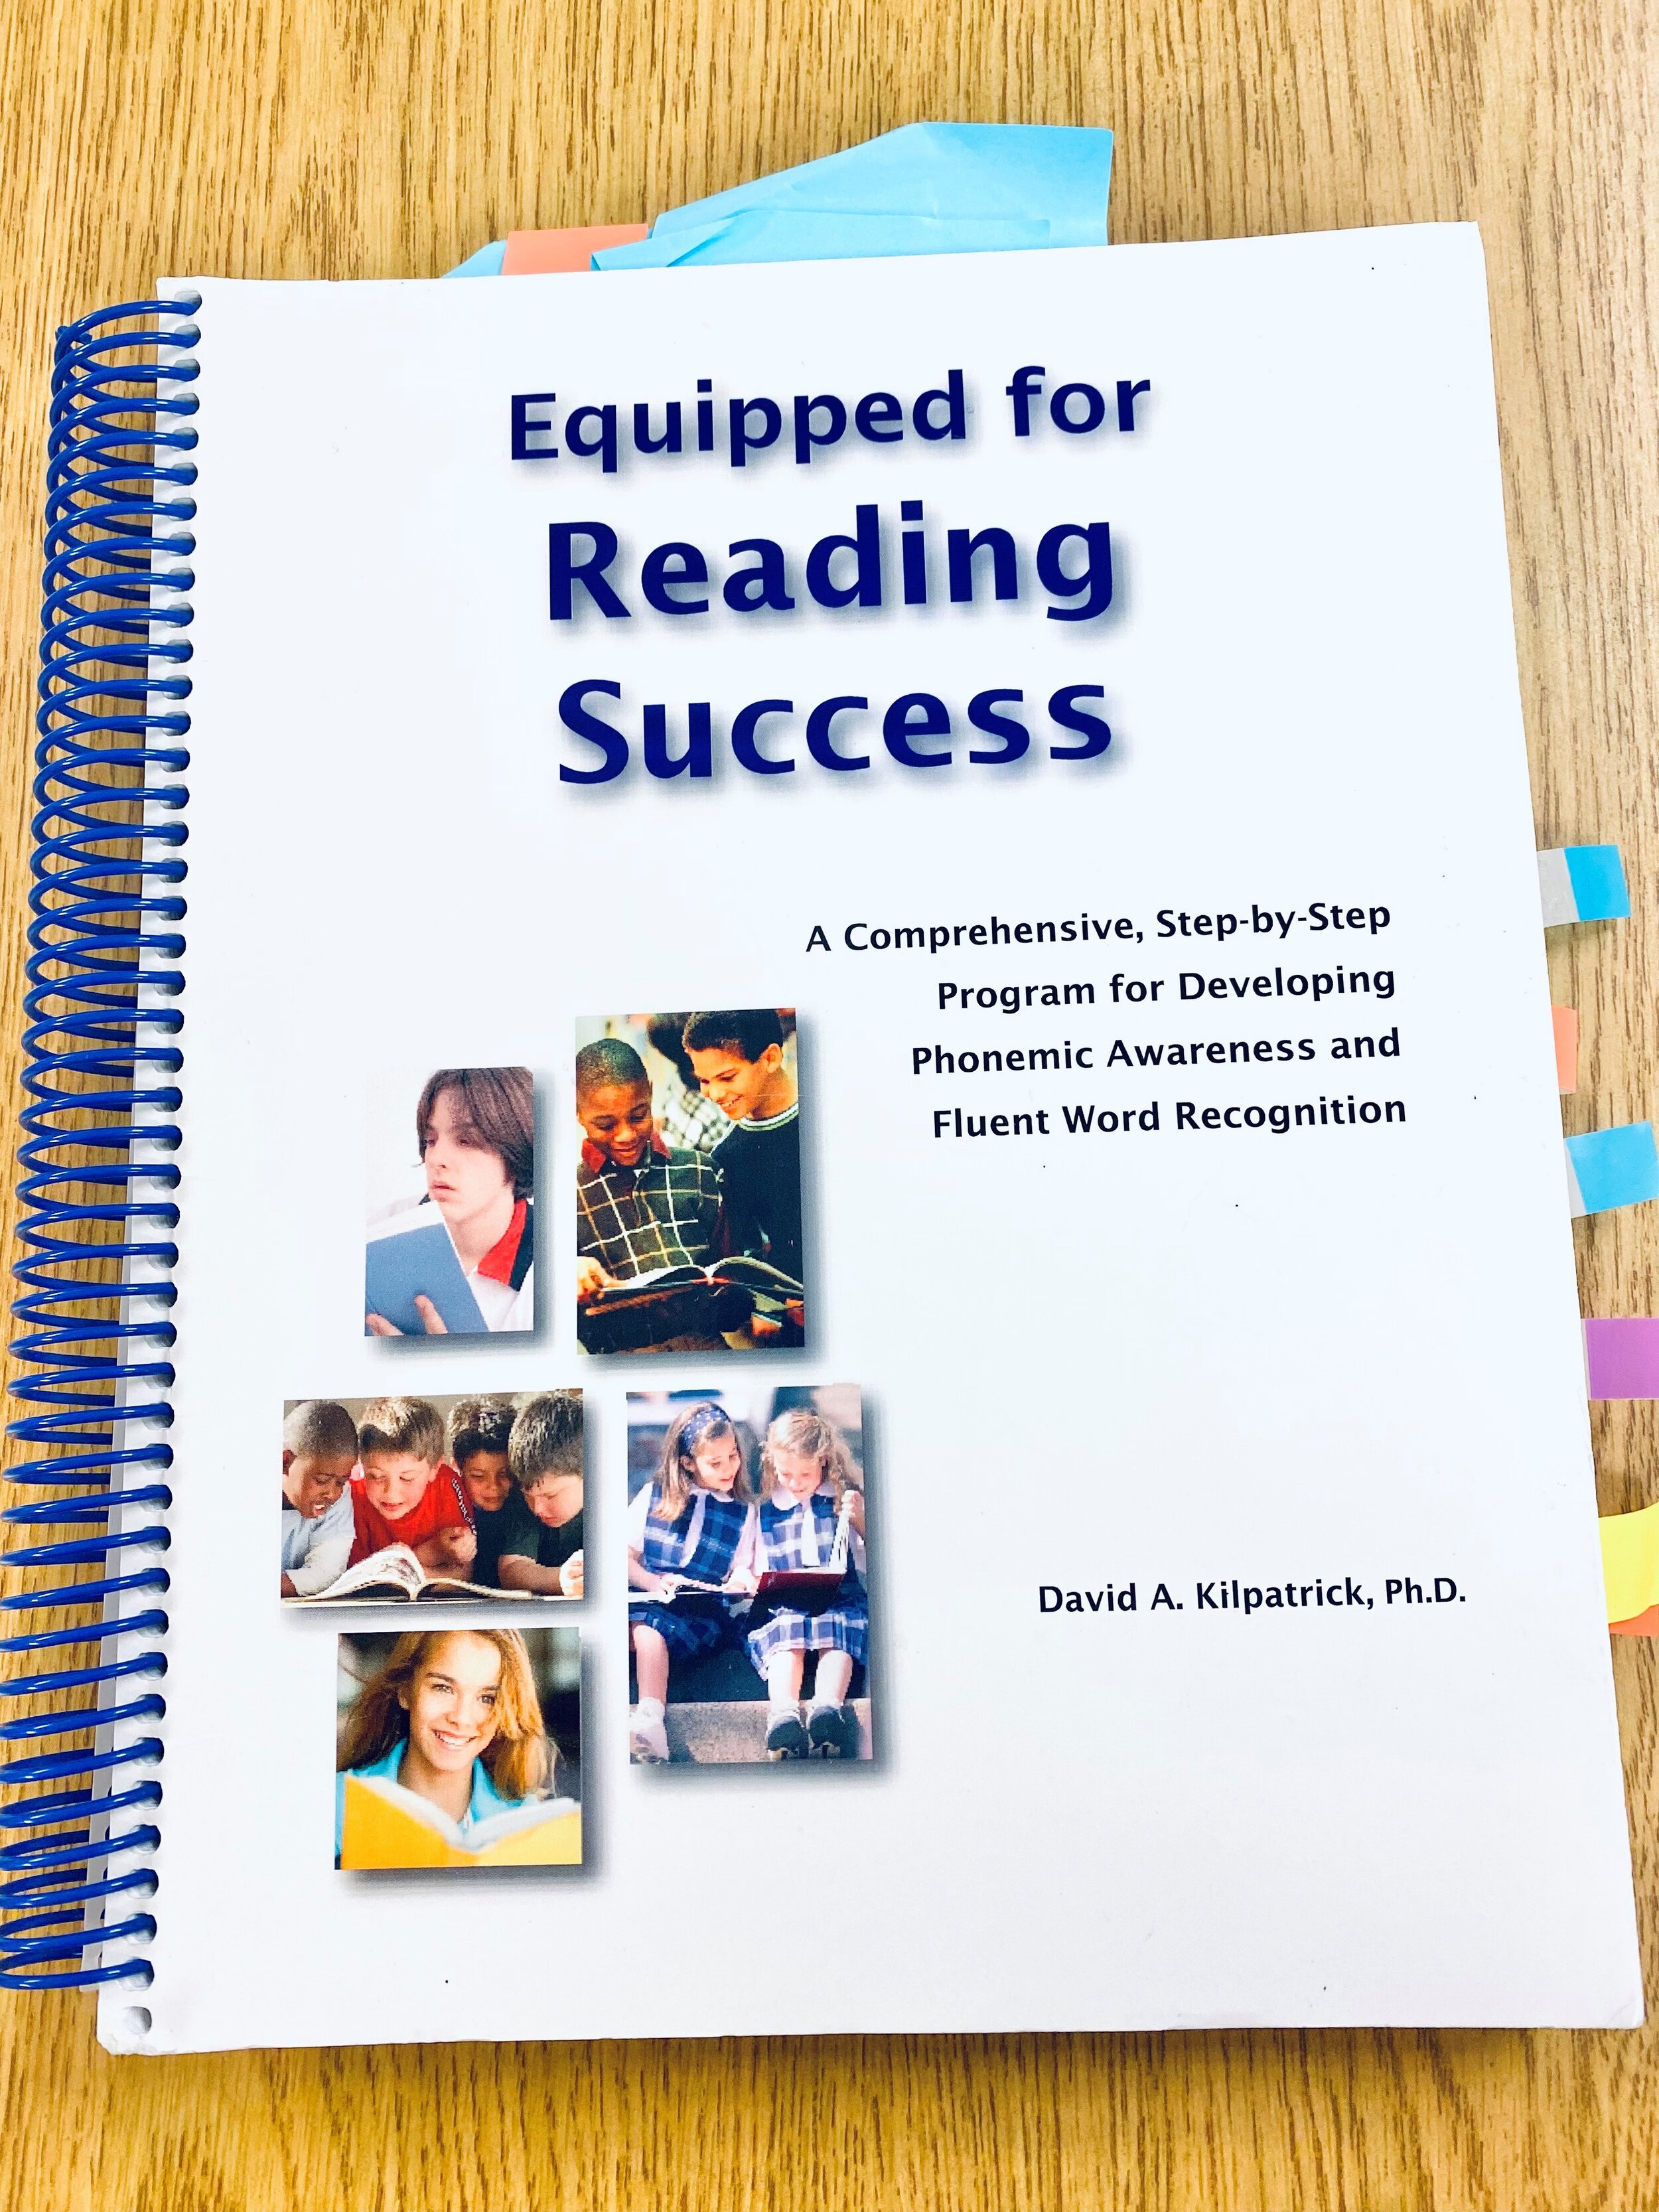 “Equipped for Reading Success” is a fantastic book with an entire chapter devoted to orthographic mapping.  Highly recommend!